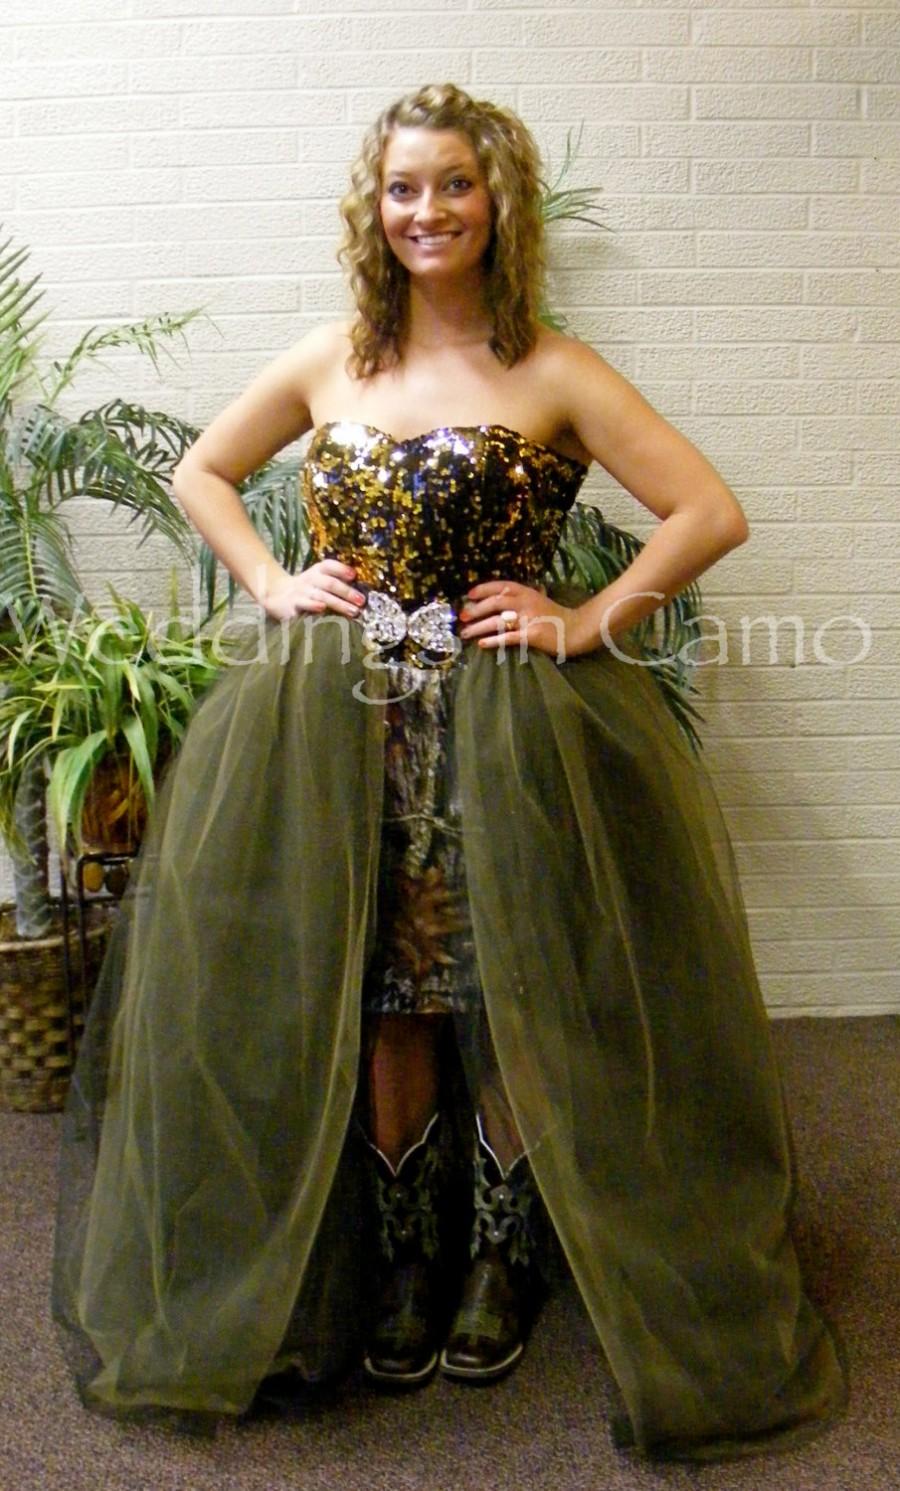 Wedding - CAMO dress SHORT dress with sequined top Optional Full Skirt and Rhinestone Buckle